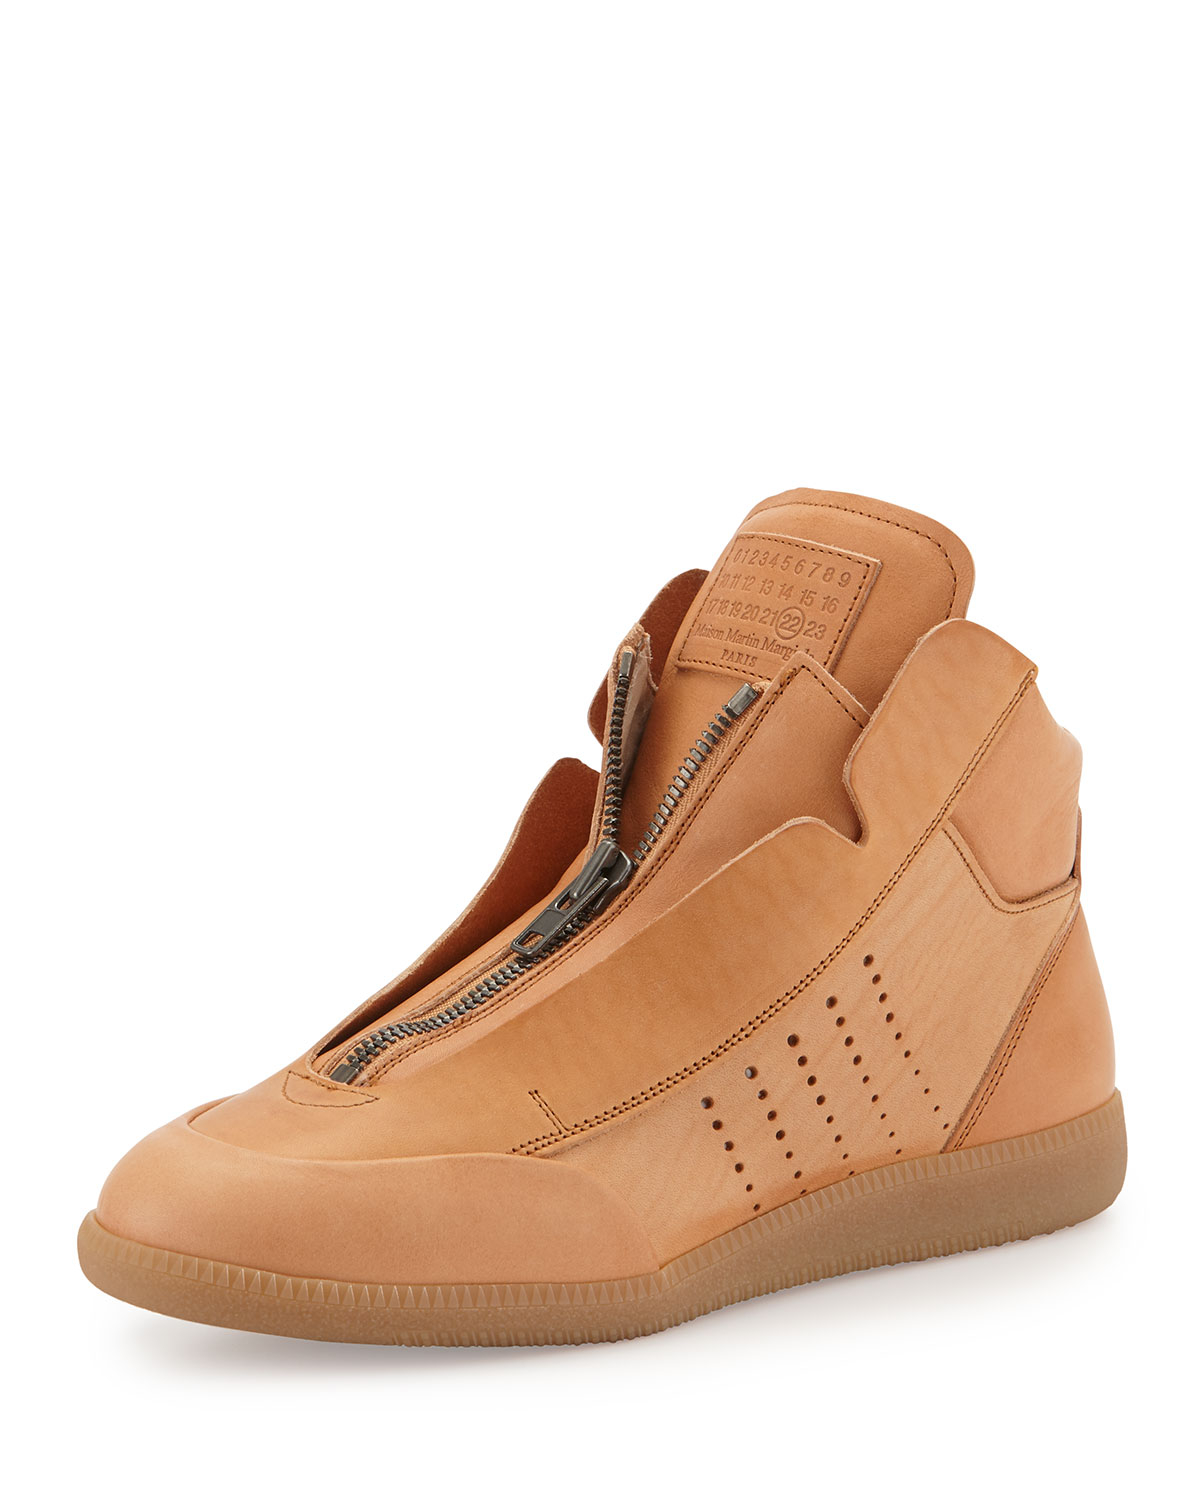 Maison Margiela New Future Leather High-Top Sneakers in Brown for Men ...